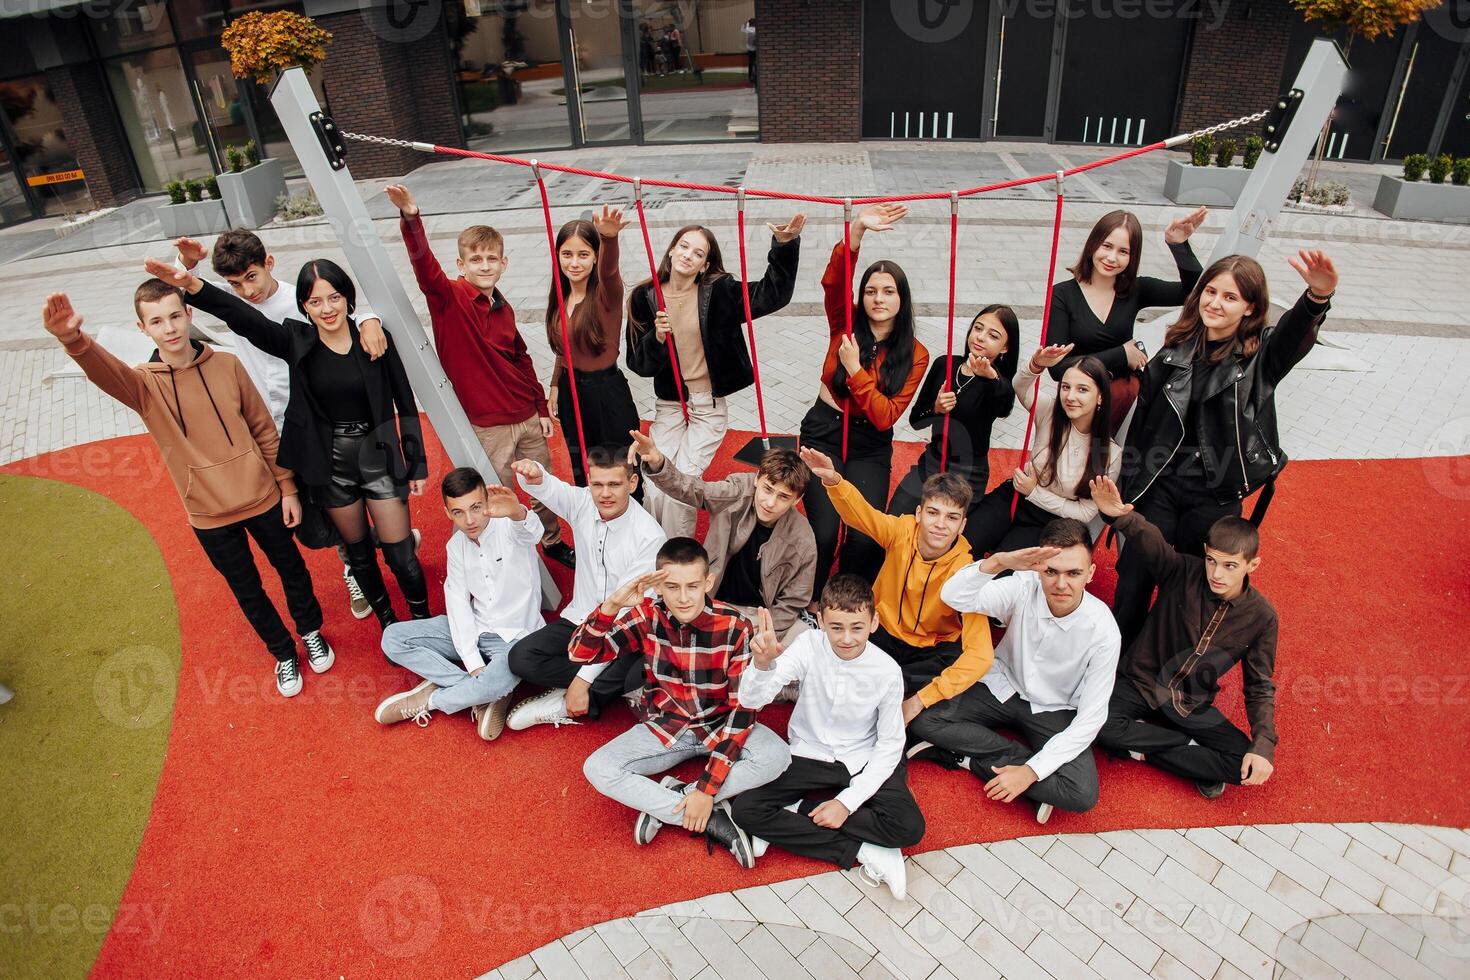 Group of many happy teenagers dressed in casual clothes having fun and having fun near college. Concept of friendship, moments of happiness. School friendship photo